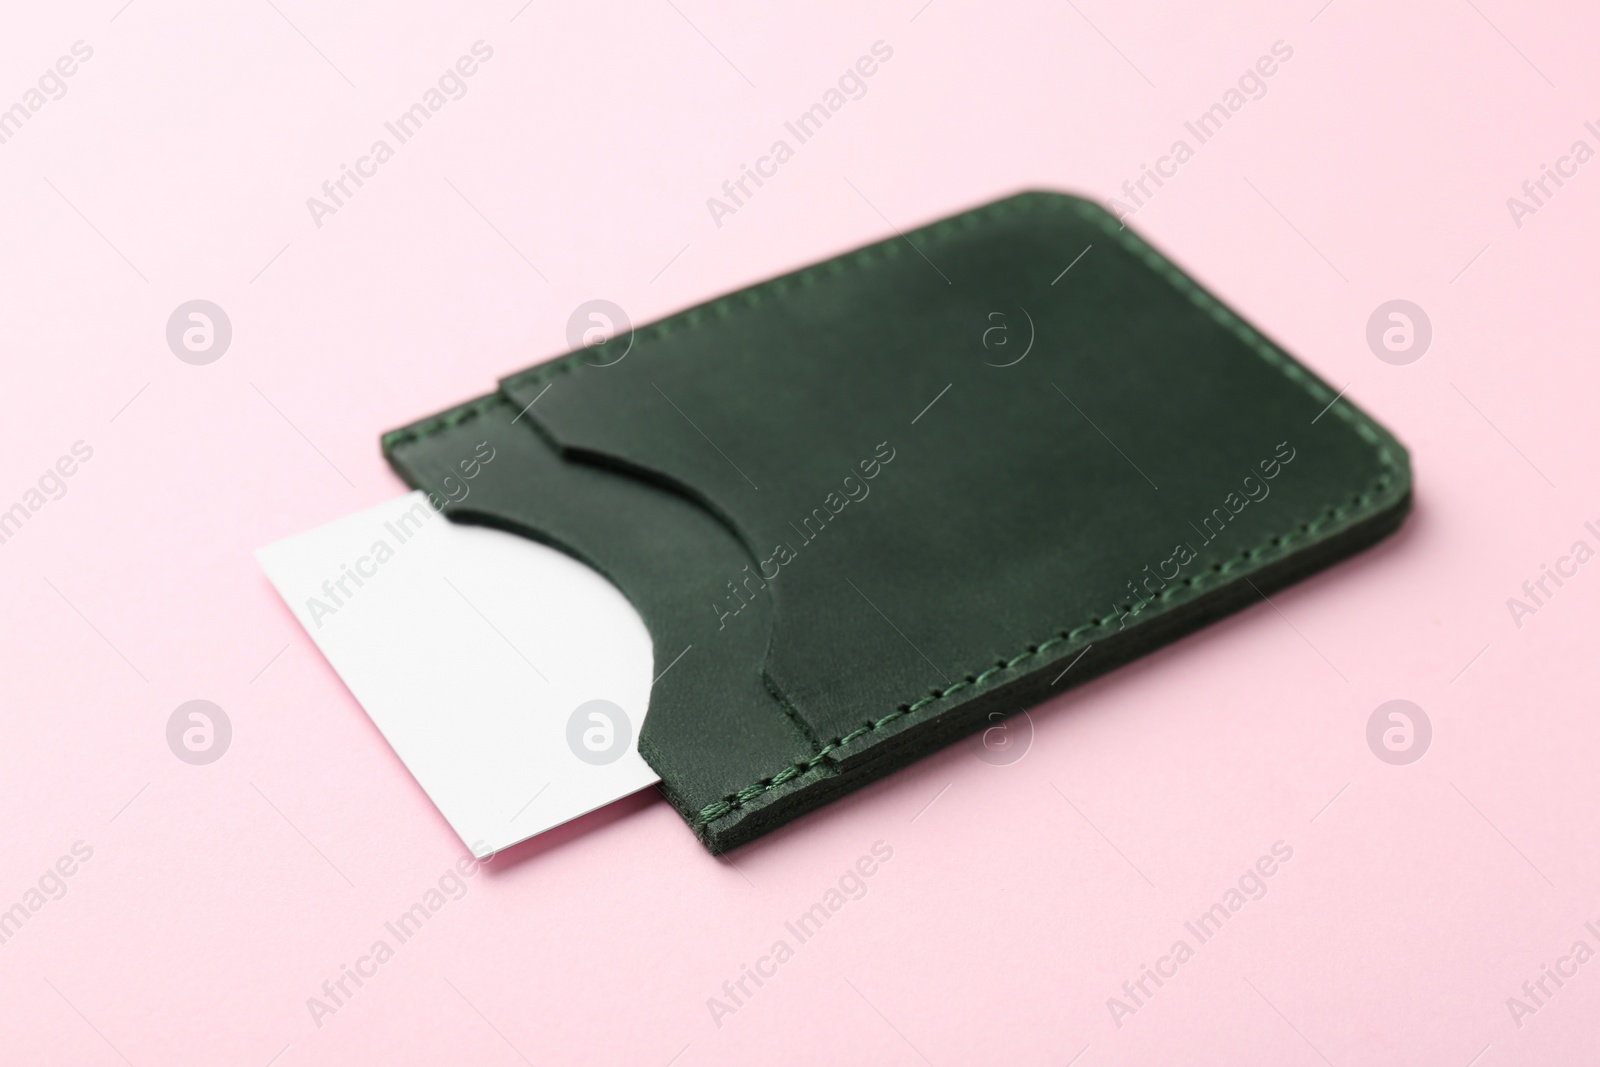 Photo of Leather business card holder with blank card on pink background